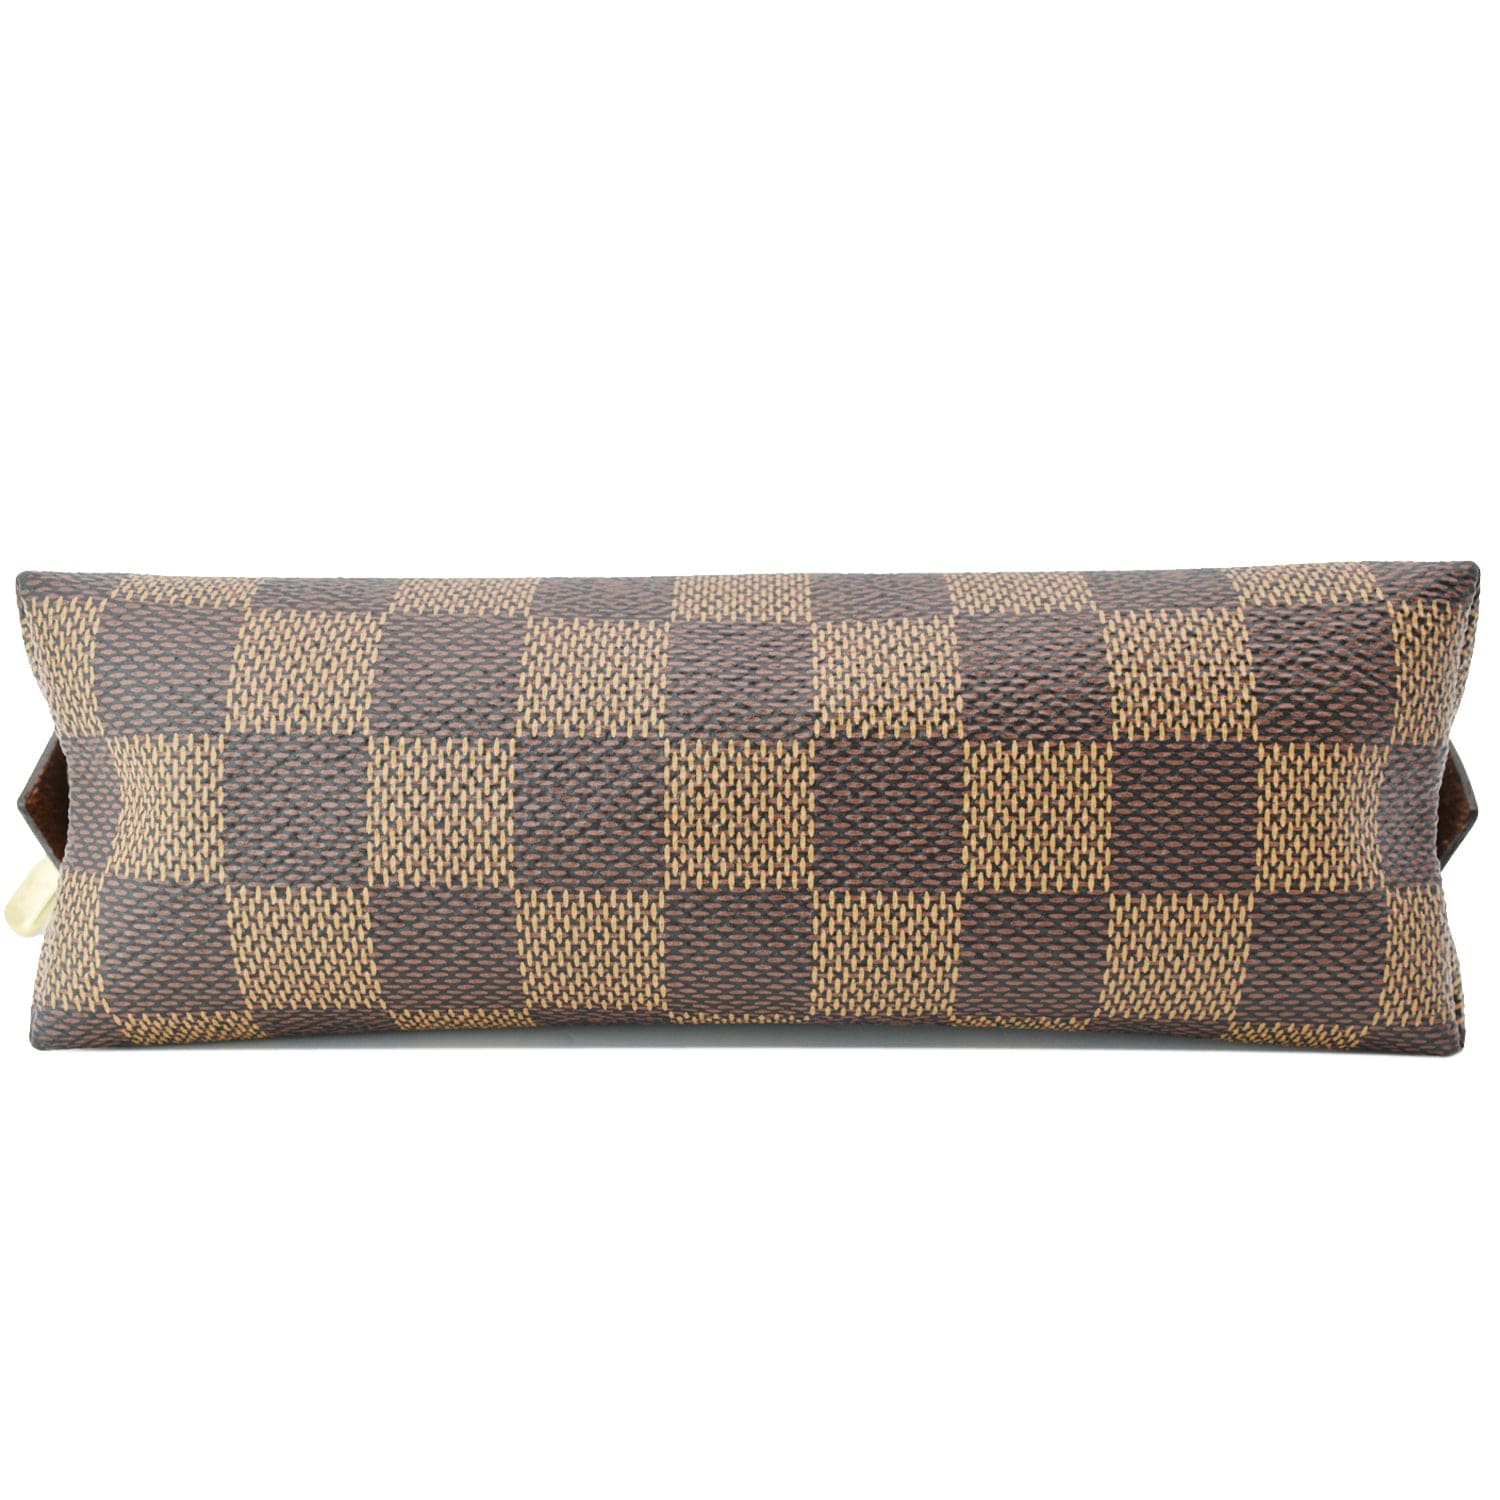 Louis Vuitton Damier Pochette Cosmetic PM Leather Brown Cosmetic Pouch 634